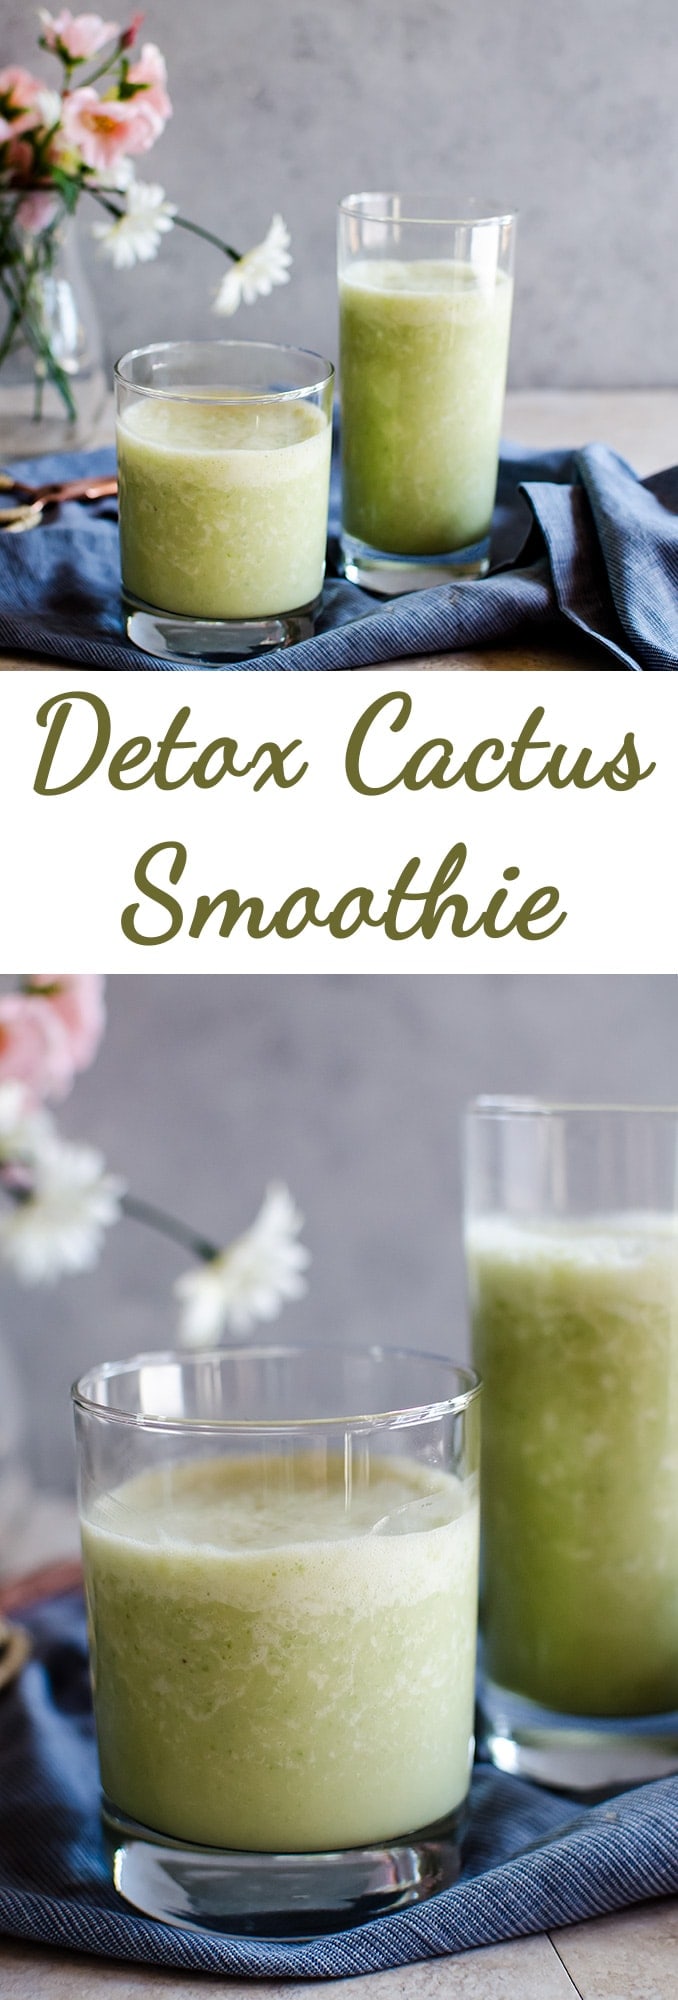 This tropical detox cactus smoothie is zingy, creamy, and tastes like you just stepped onto a beach. A healthy and delicious recipe for breakfast or as a snack! 